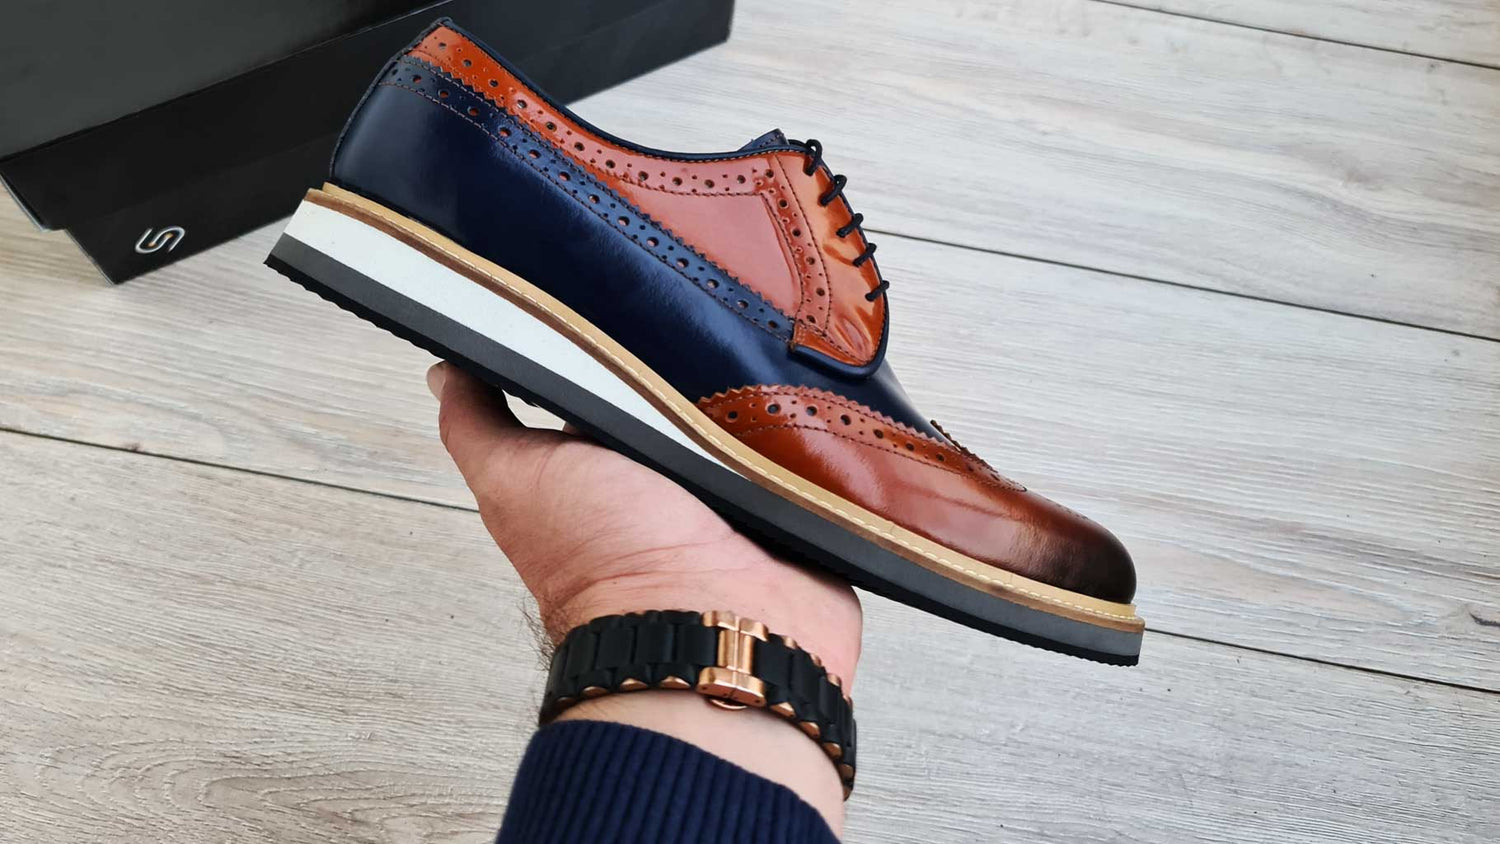 Classic LV Brogues Lace-Up Shoe-Brown - Best Nigeria online shoe store